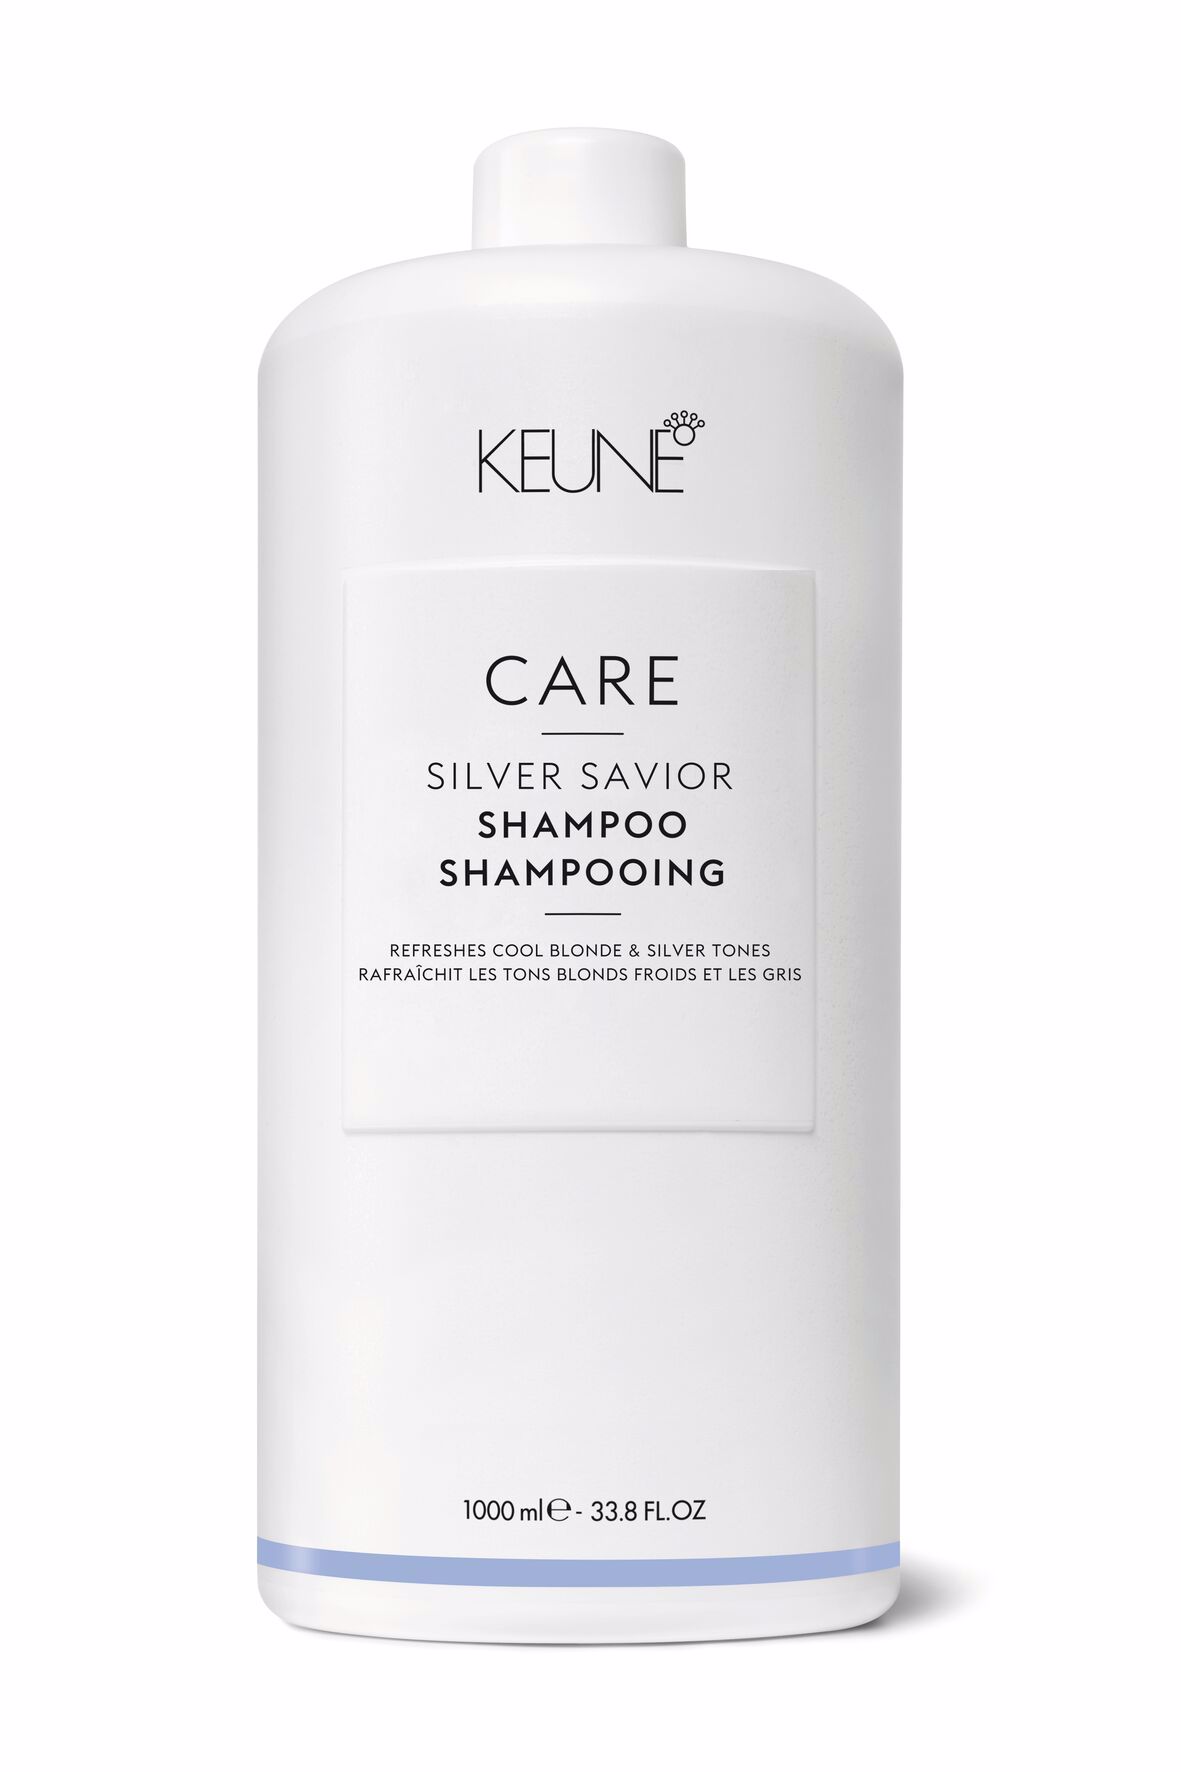 Discover Care Silver Savior Shampoo for blonde hair. It protects the color, neutralizes yellow tones, and nourishes with Provitamin B5 for smooth hair.  Silver shampoo on keune.ch.